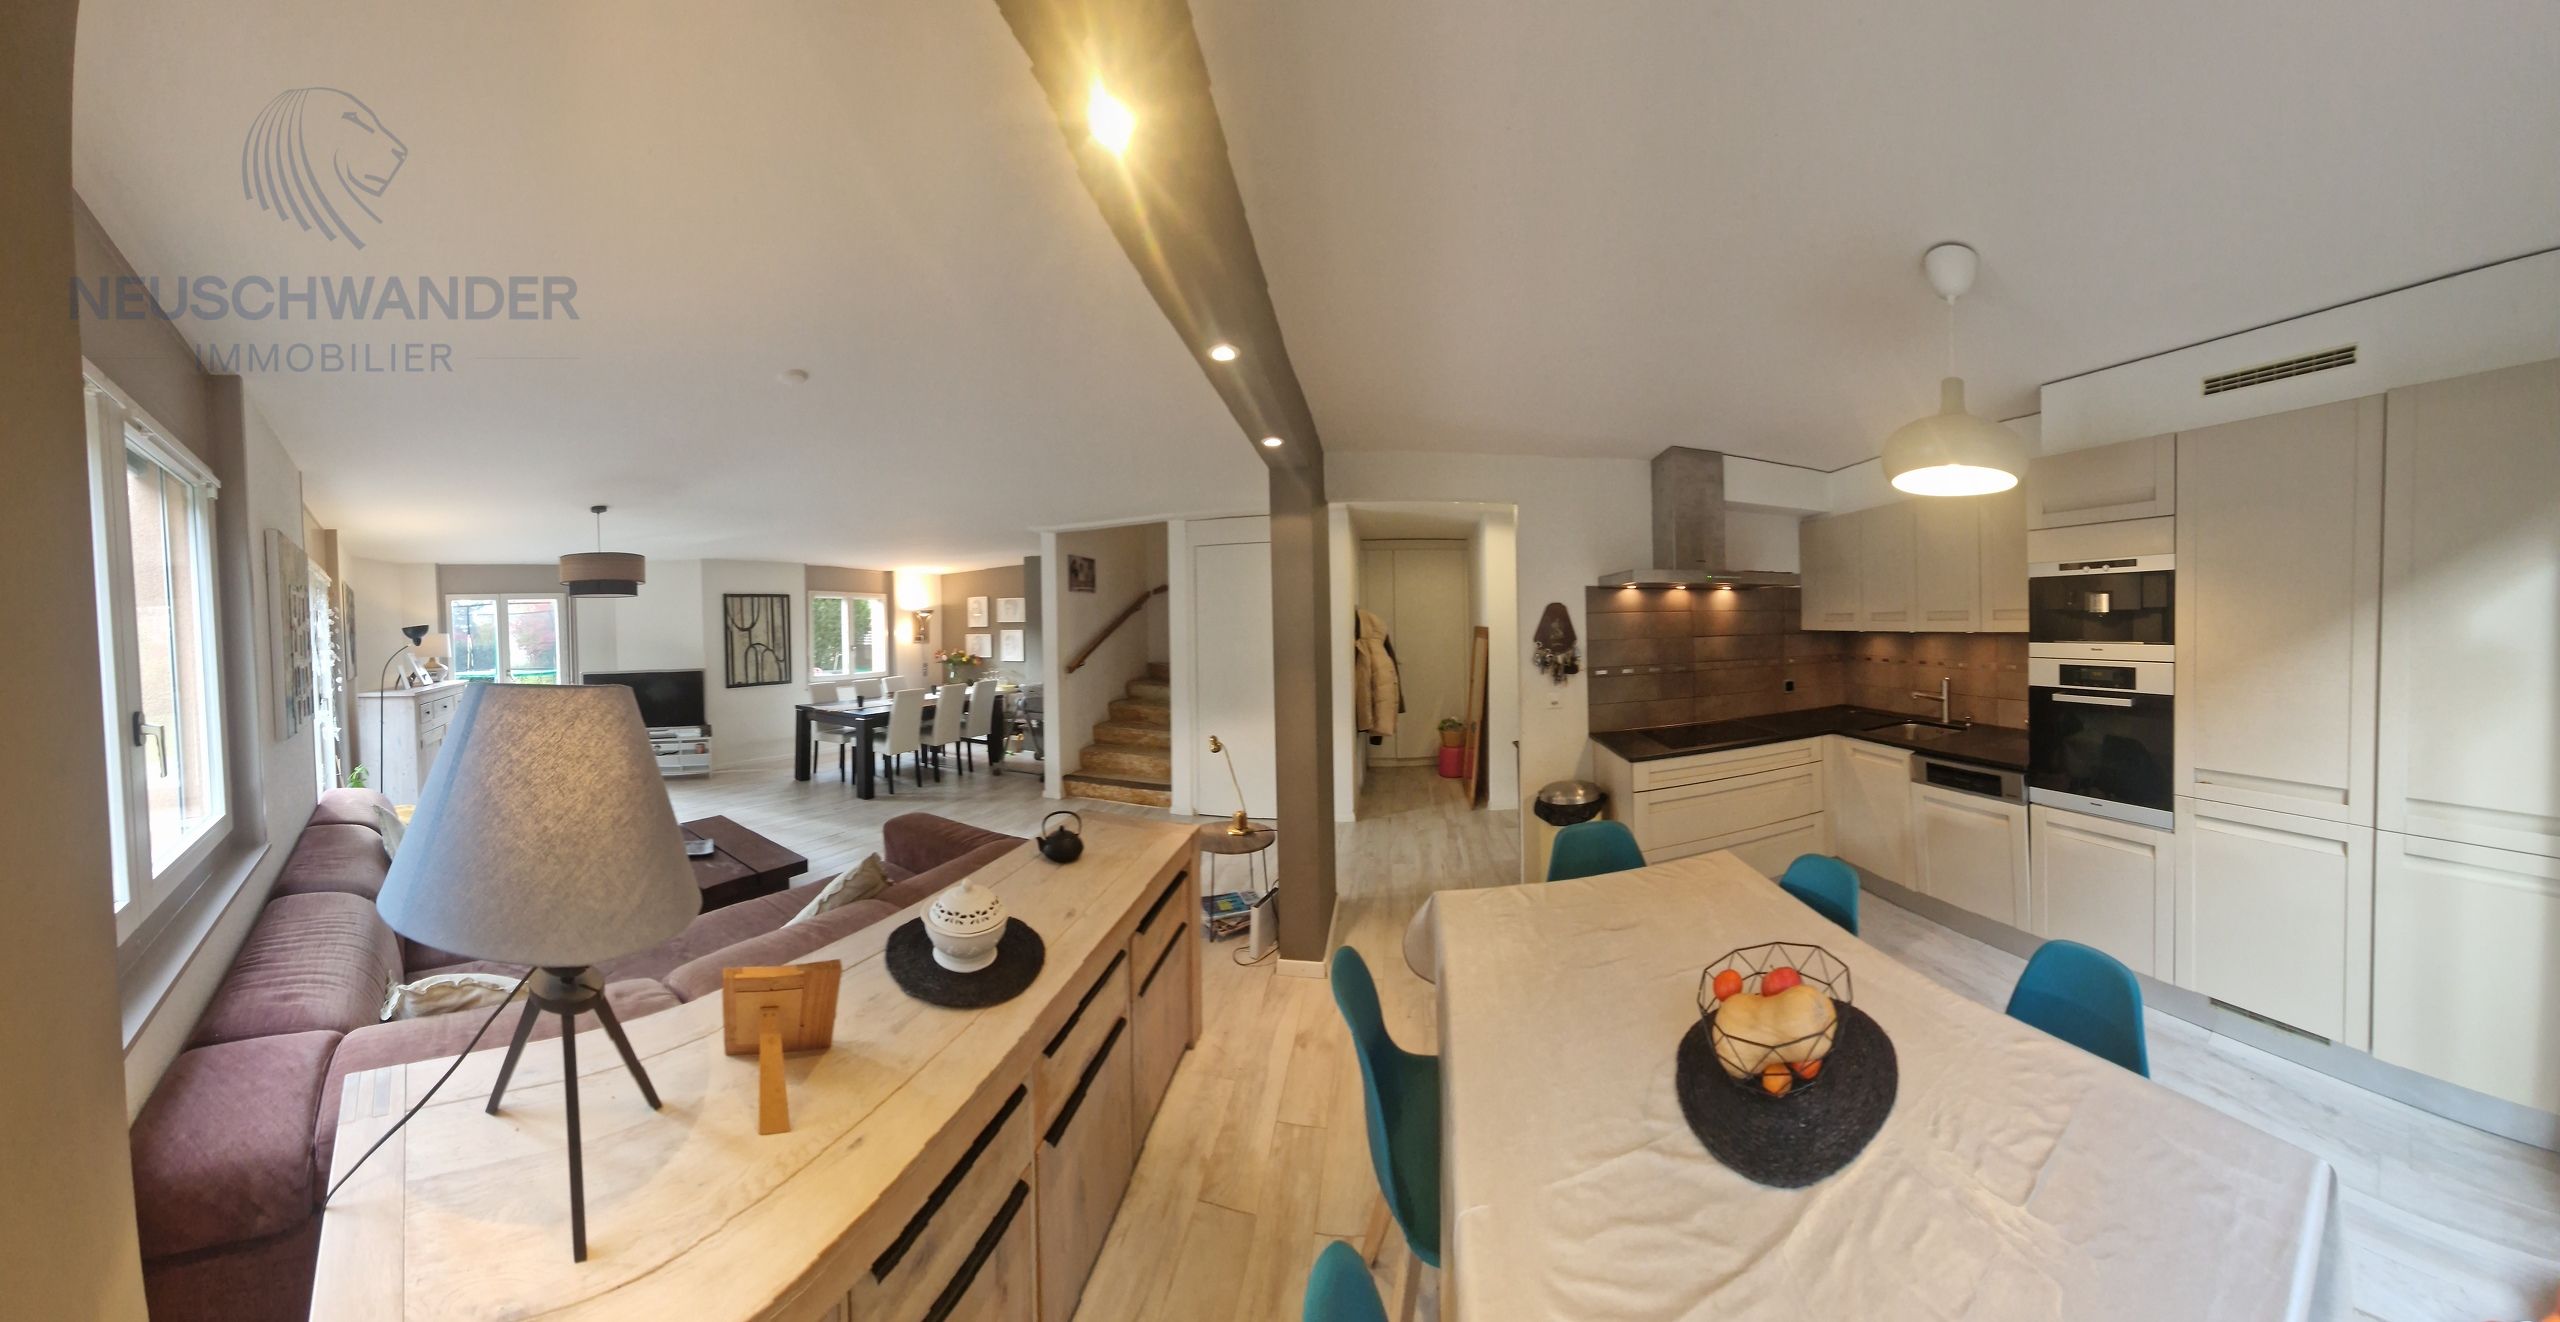 panoramic view - kitchen - living room